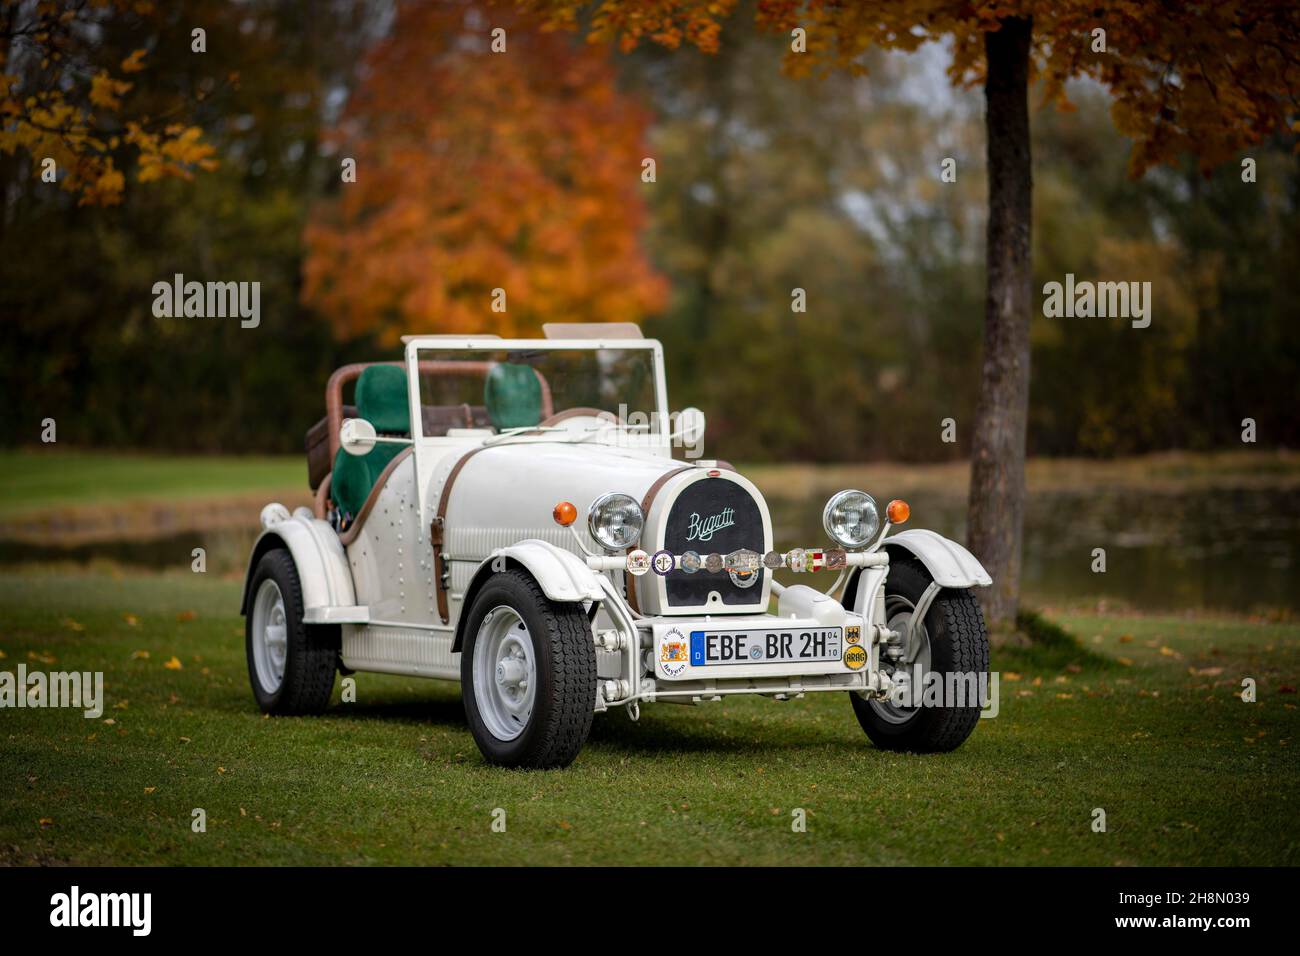 Oldtimer, Replica of a 1923 Bugatti 35 B from the year of completion 1989 stands on the basis of a VW Beetle with a 50 hp engine from a VW Bully T2 Stock Photo